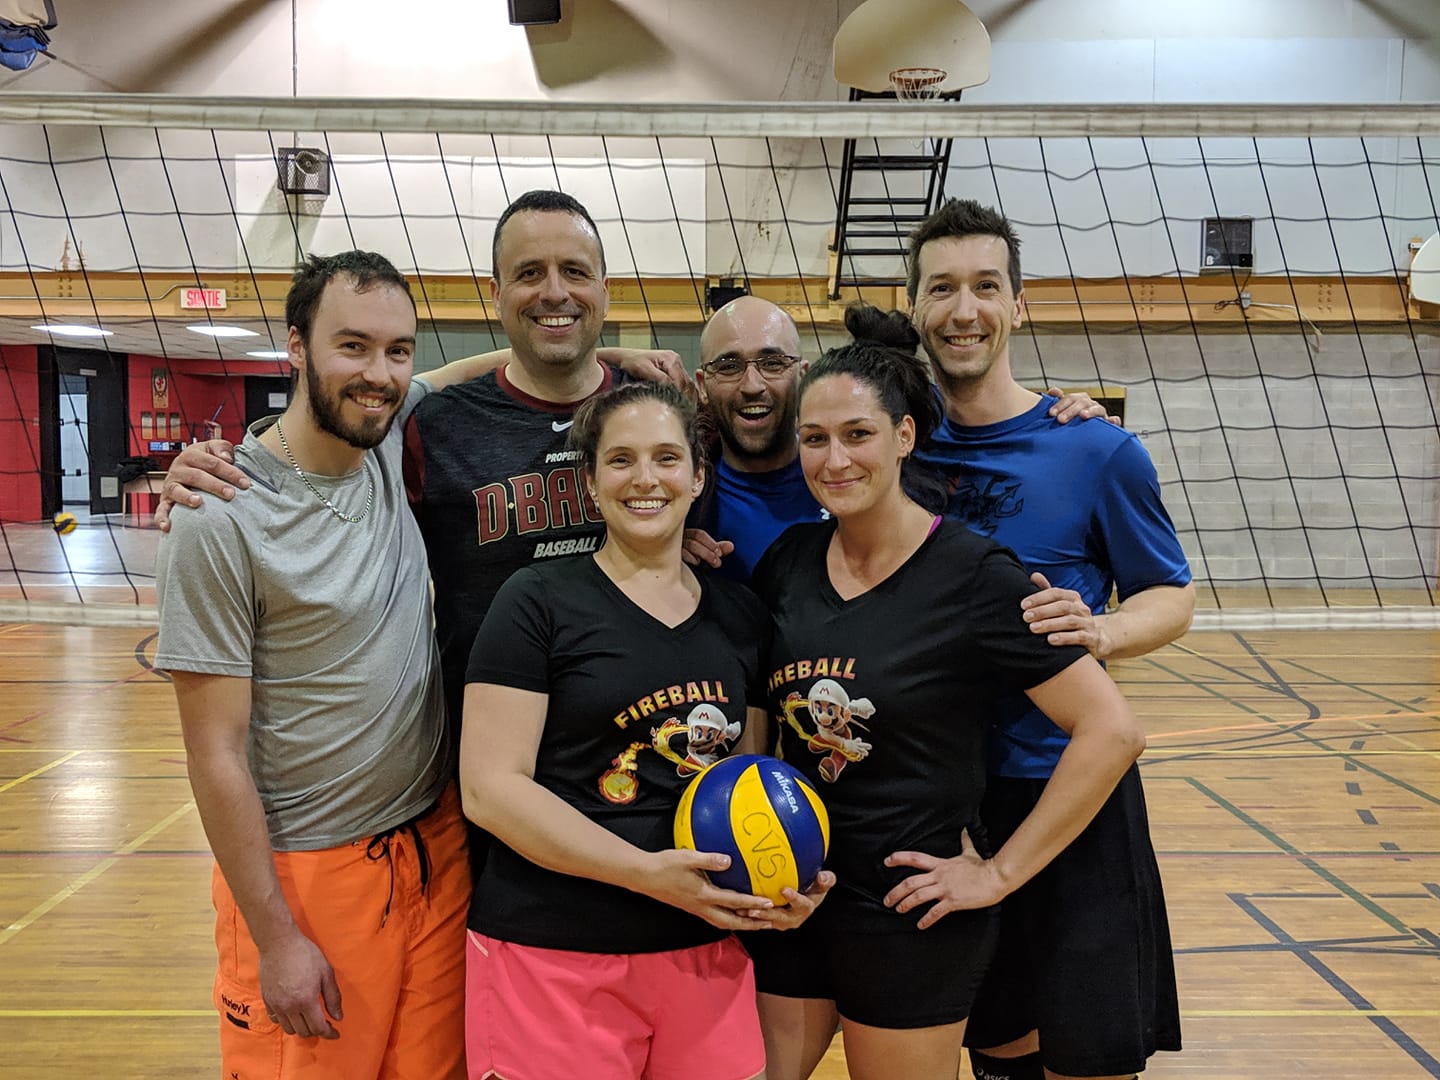 Volleyball adulte - Club de Volleyball Saguenay